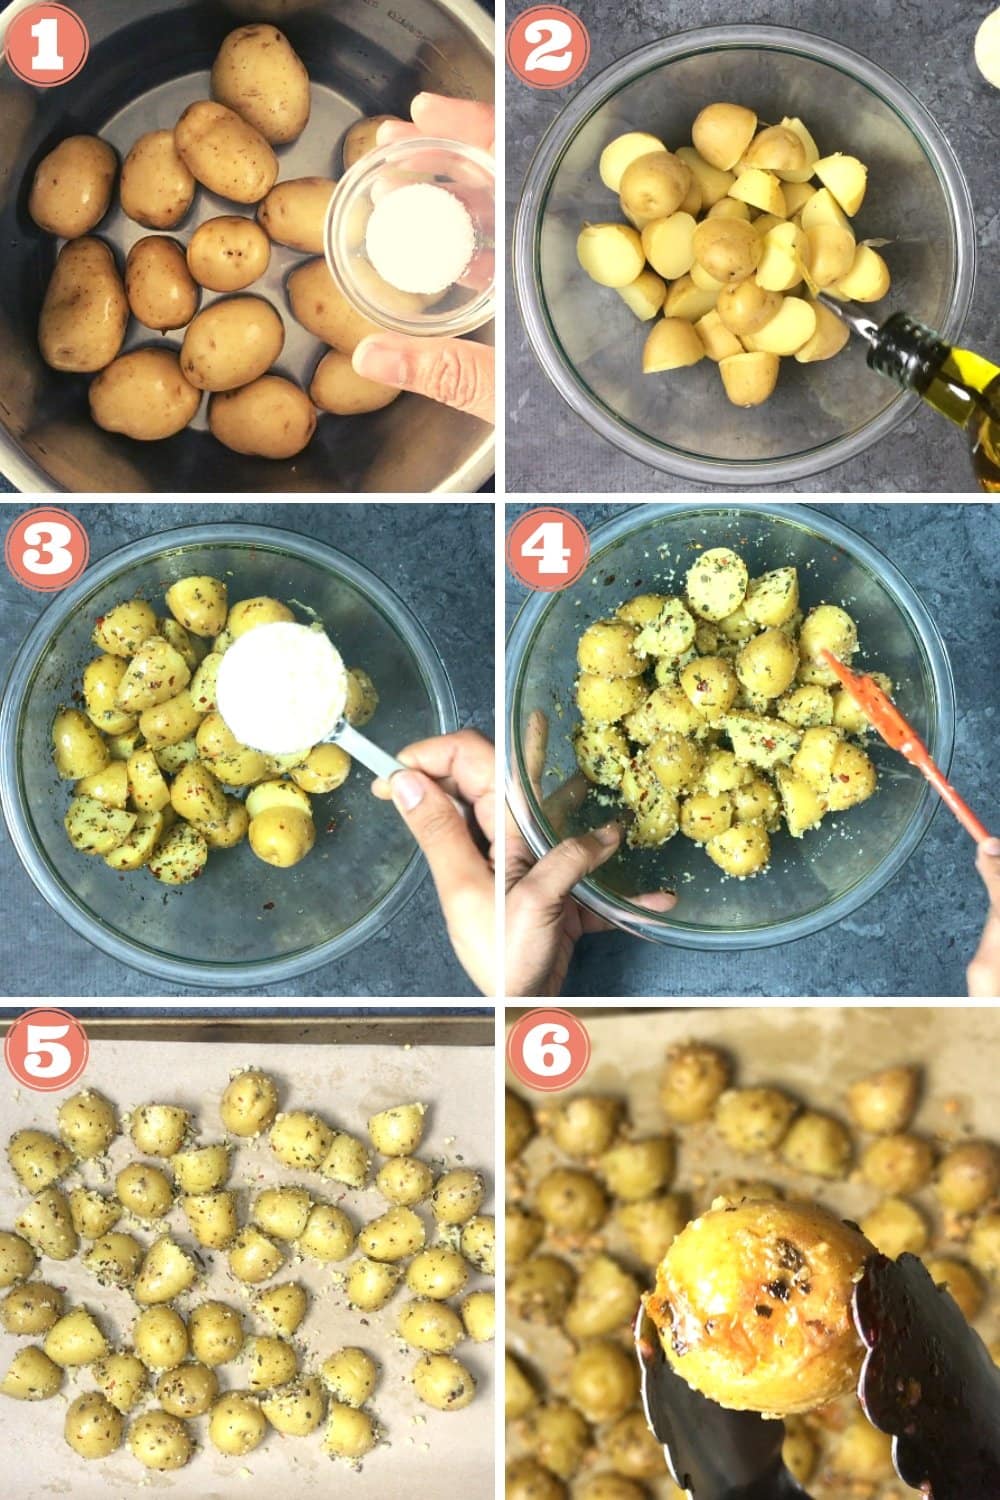 6-image grid showing steps to cook parmesan potatoes in an instant pot